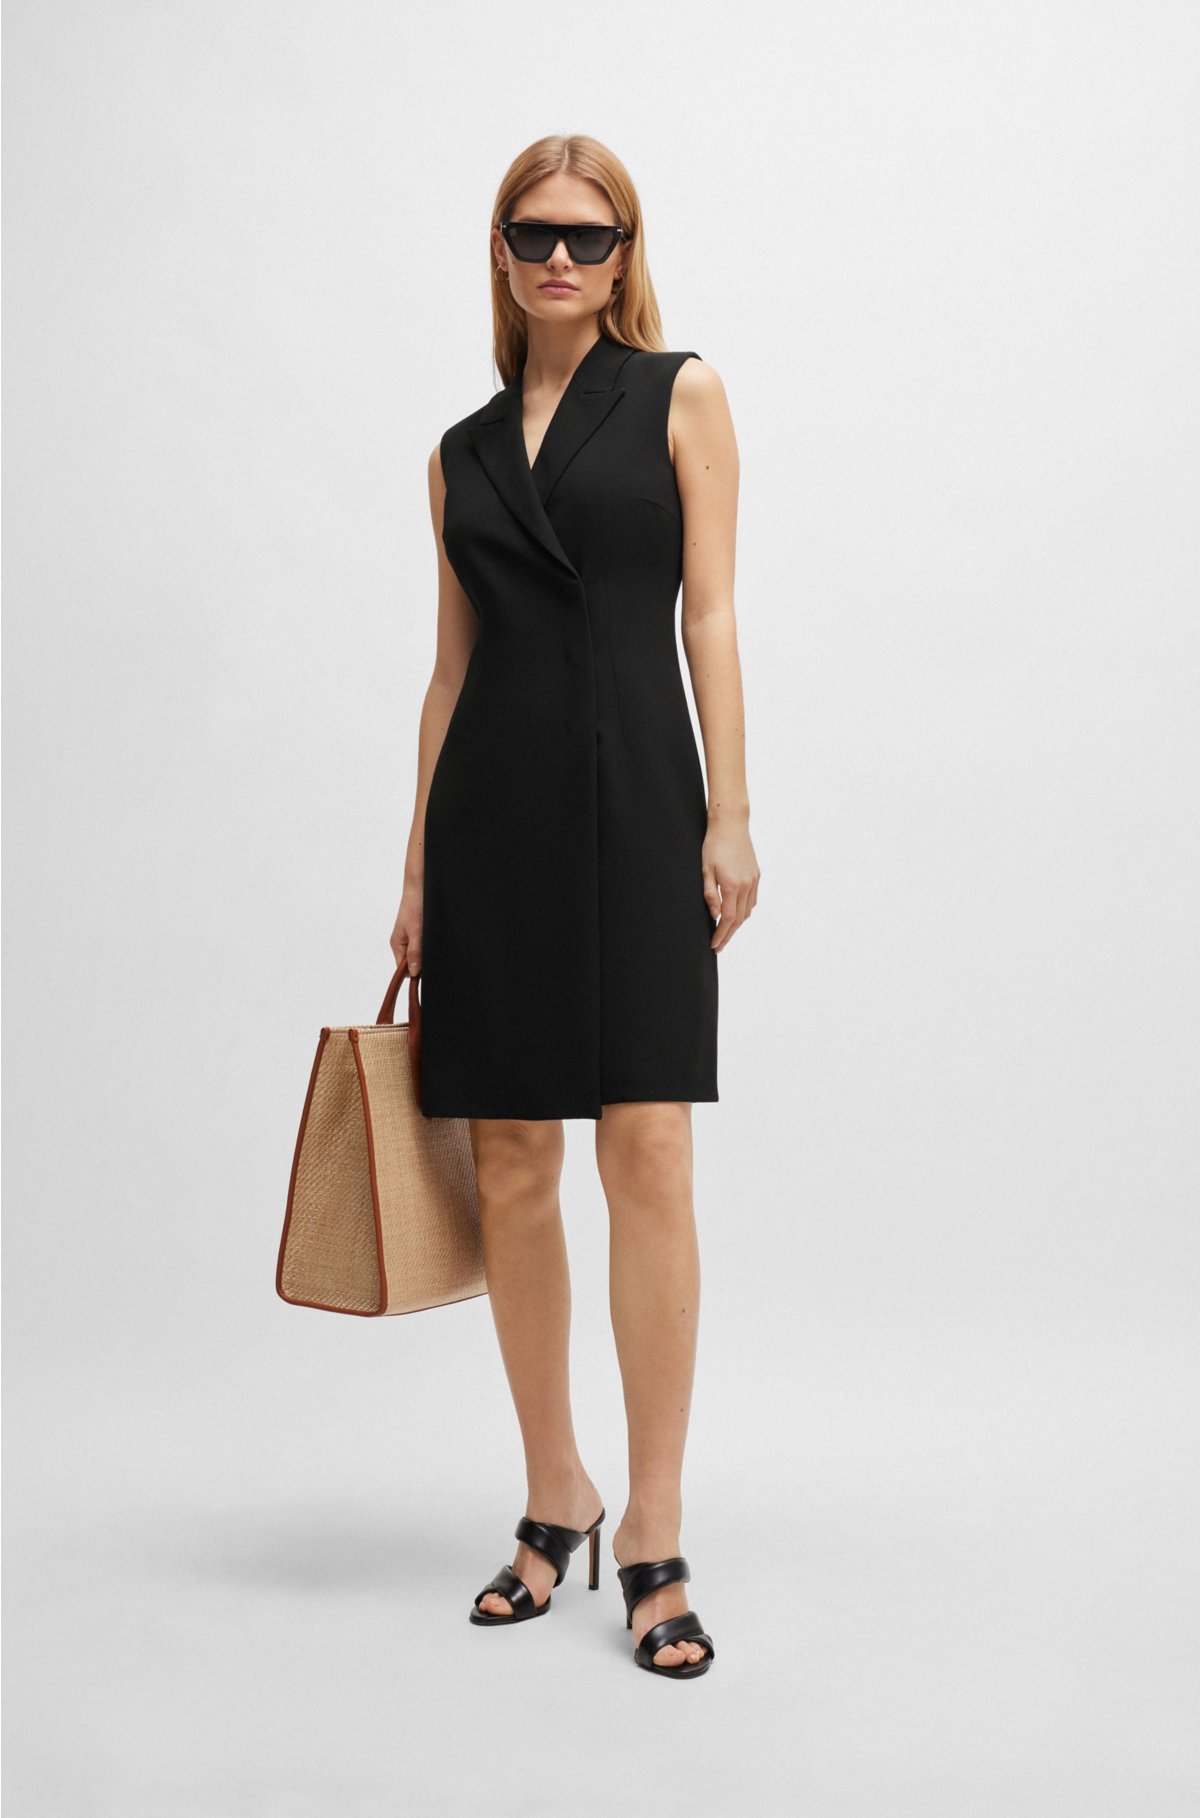 BOSS - Blazer-style sleeveless dress with concealed closure